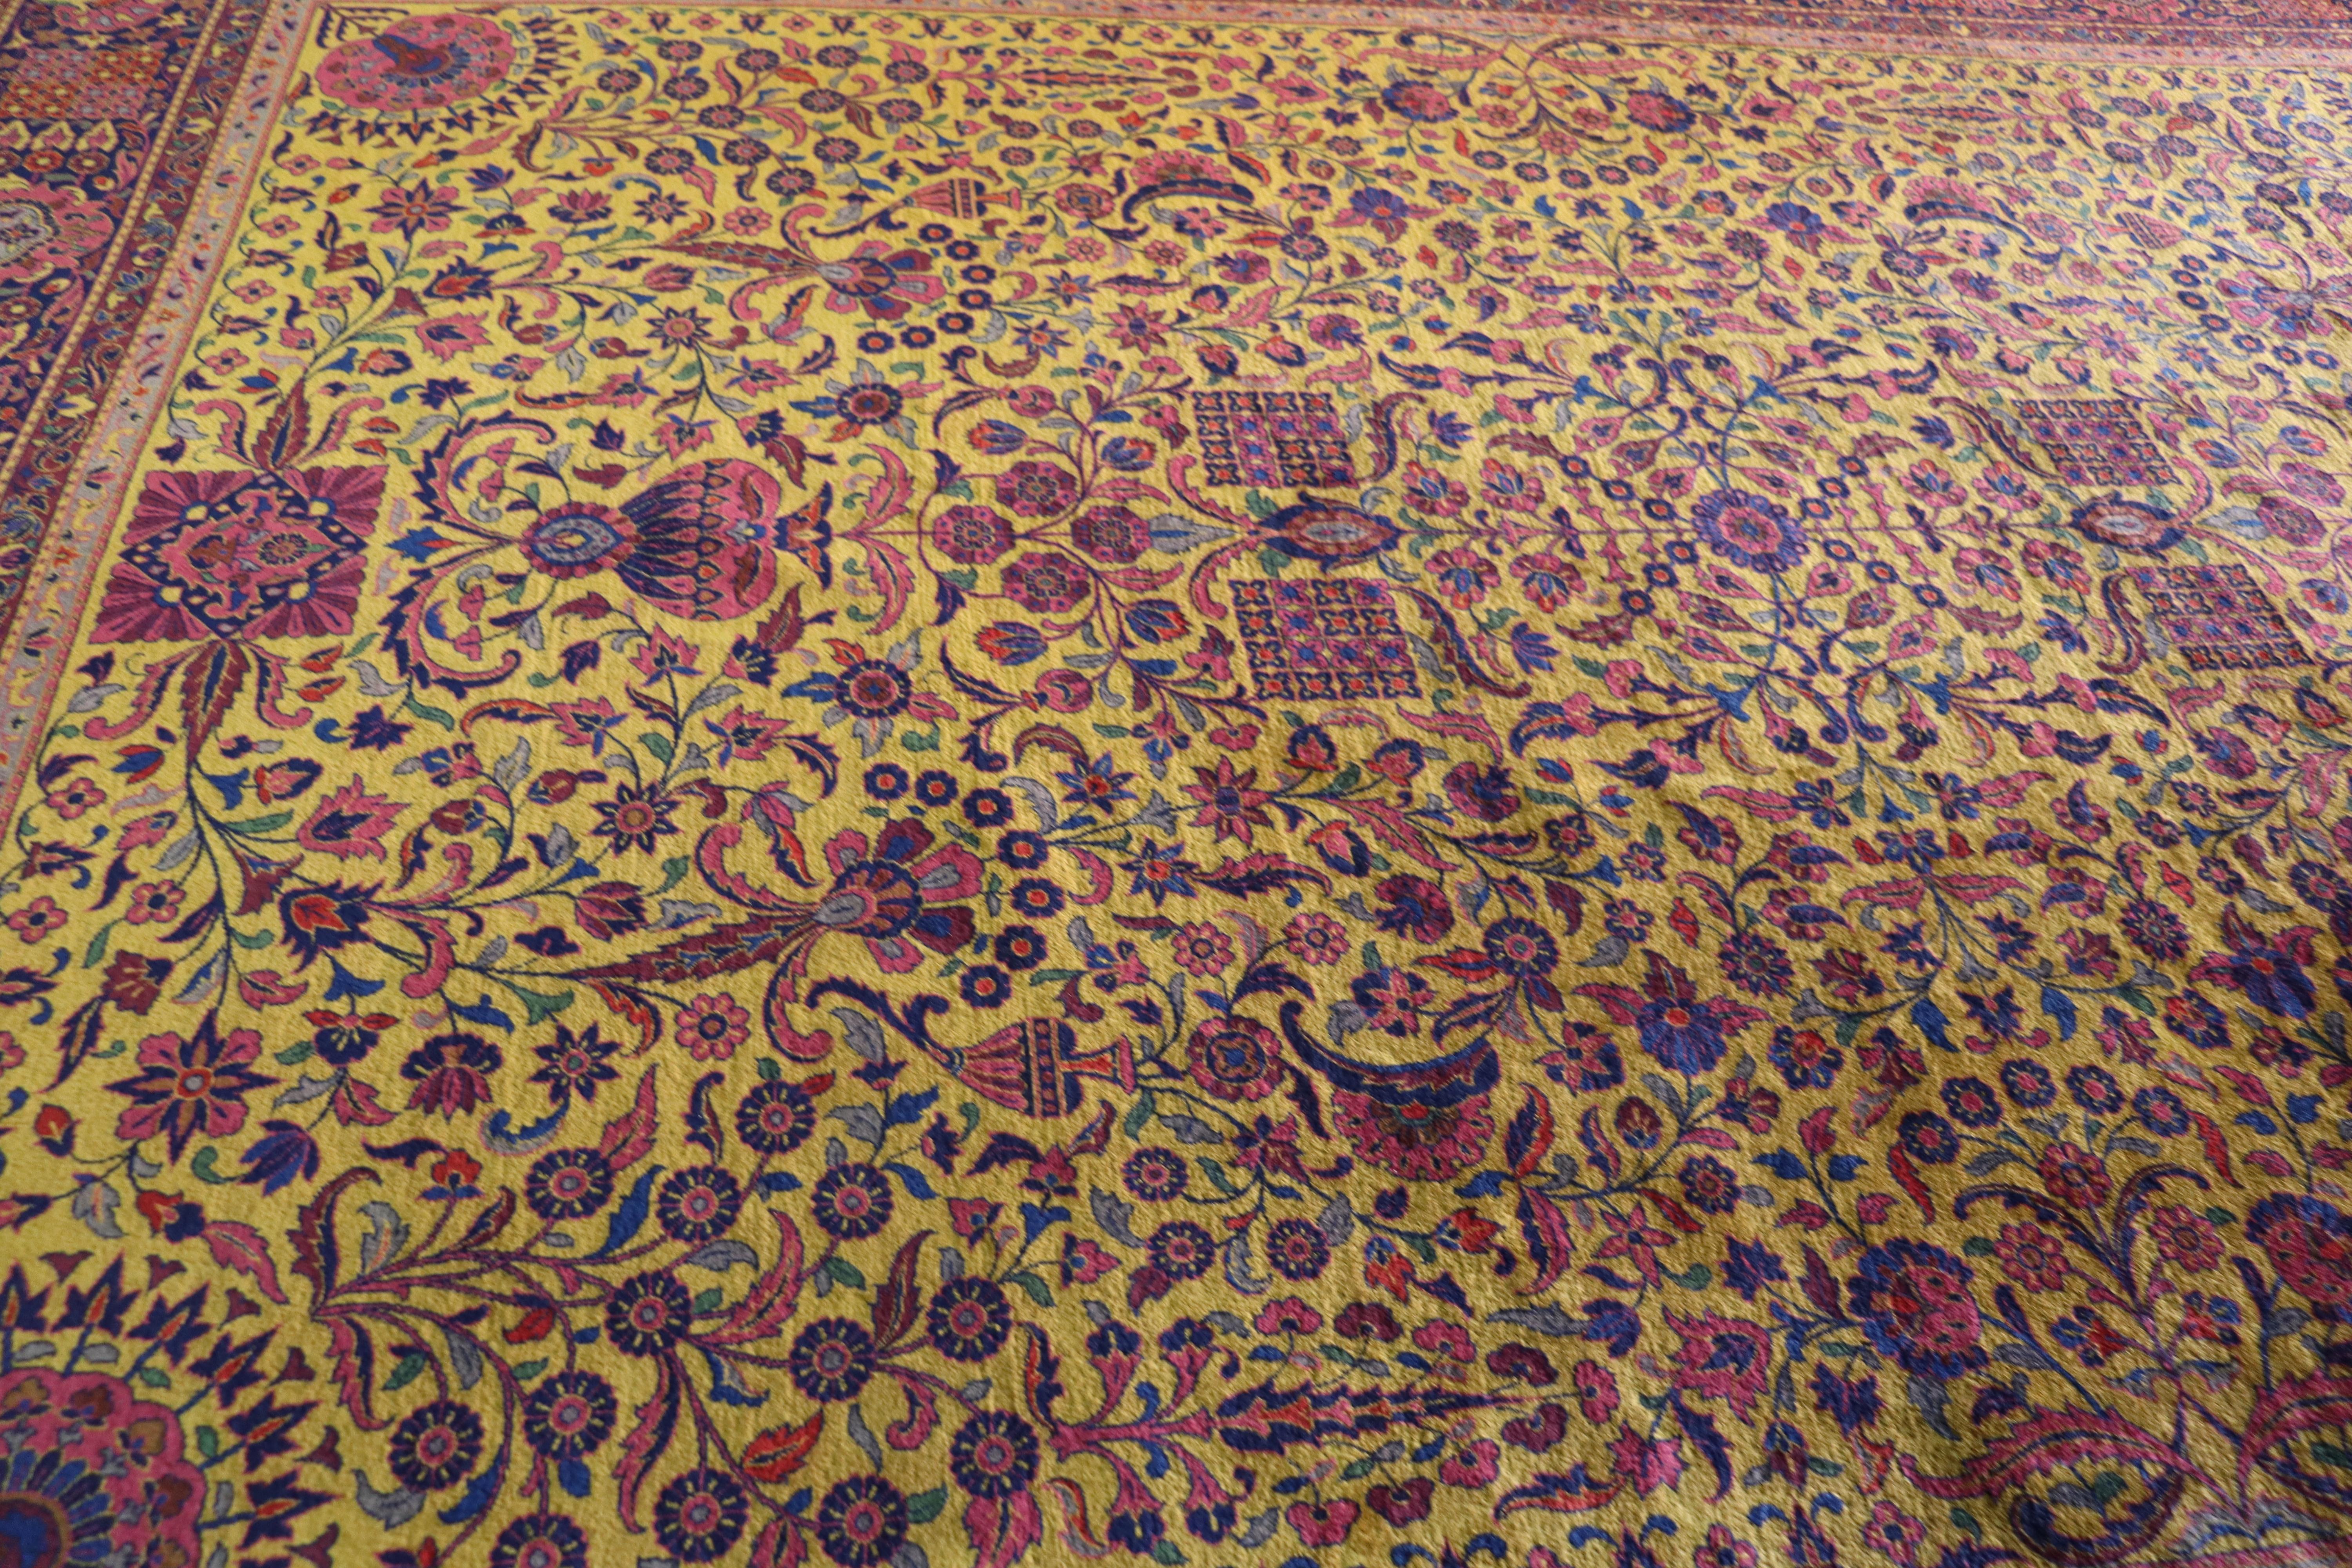 Antique Golden Manchester Kashan Carpet, The Finest, 10' x 14' In Excellent Condition For Sale In Evanston, IL